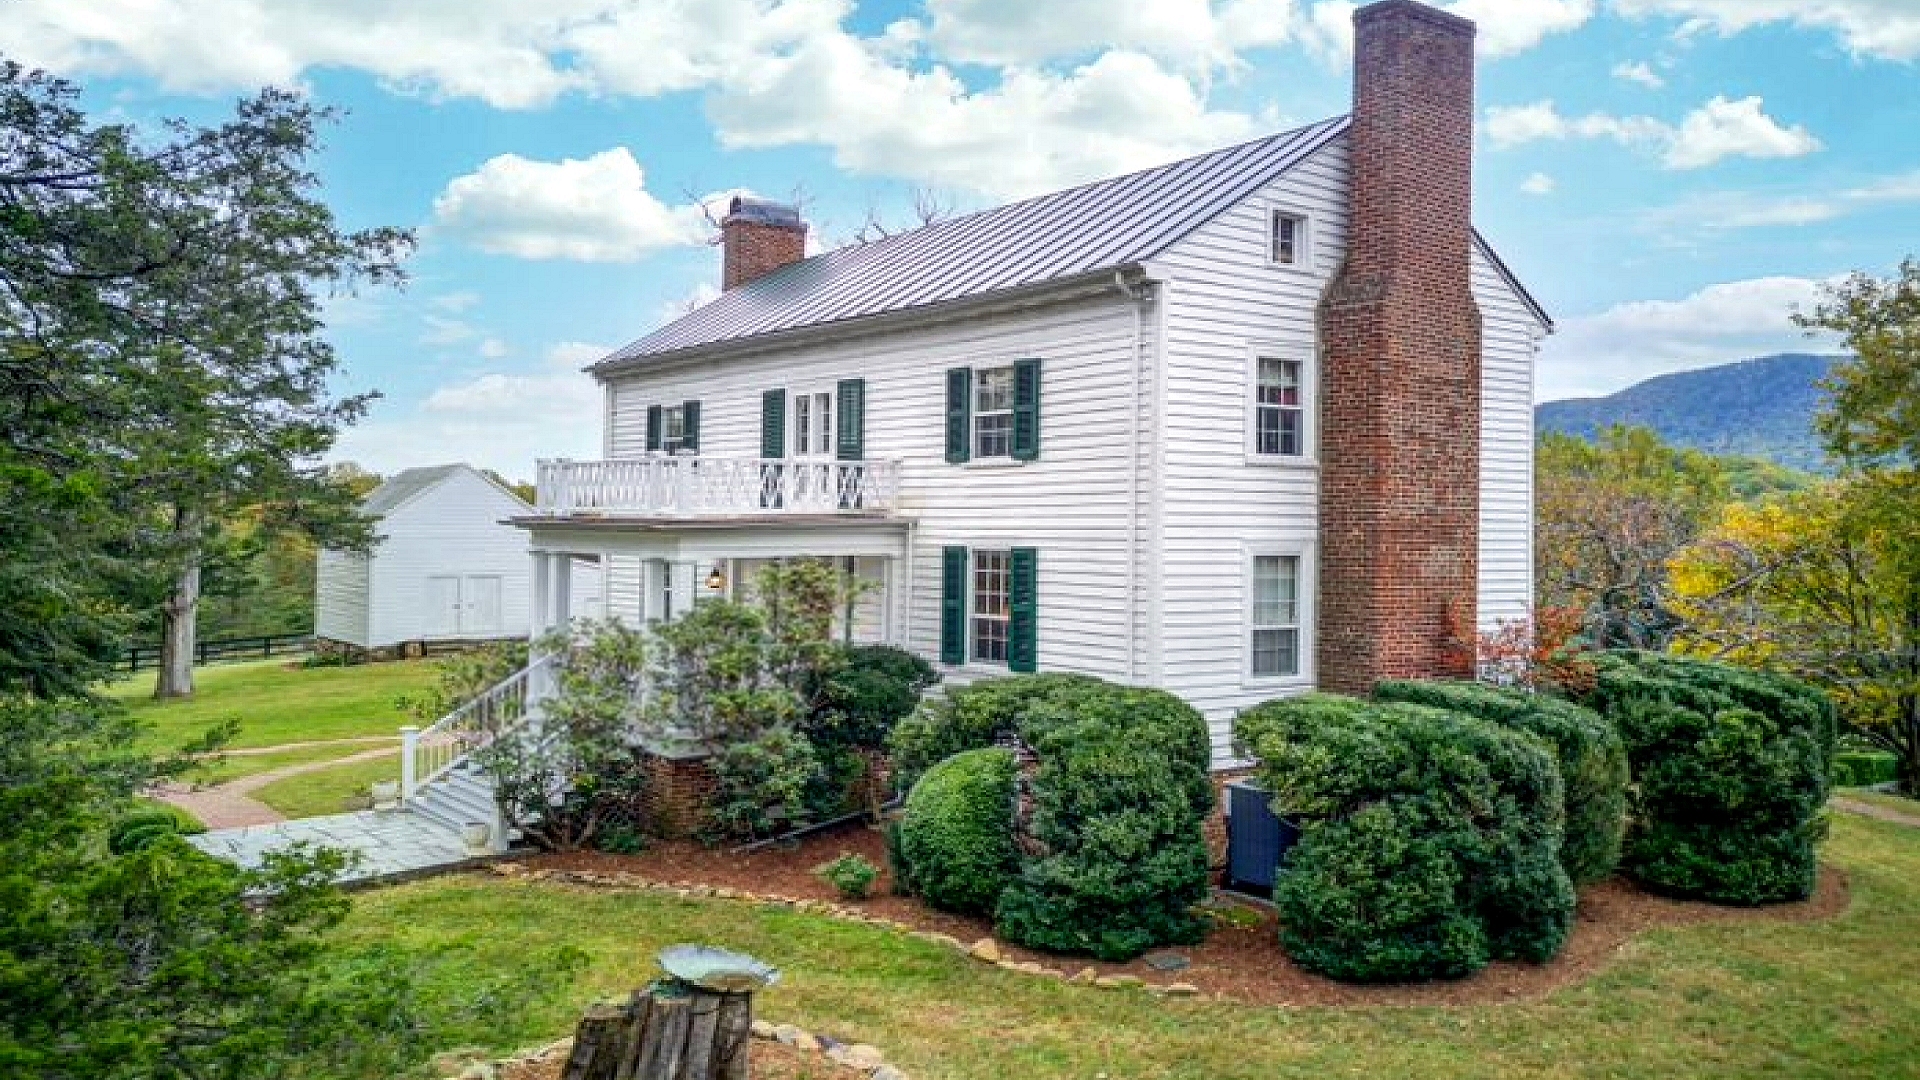  Historic Home and Farm for Sale in Nelson County VA